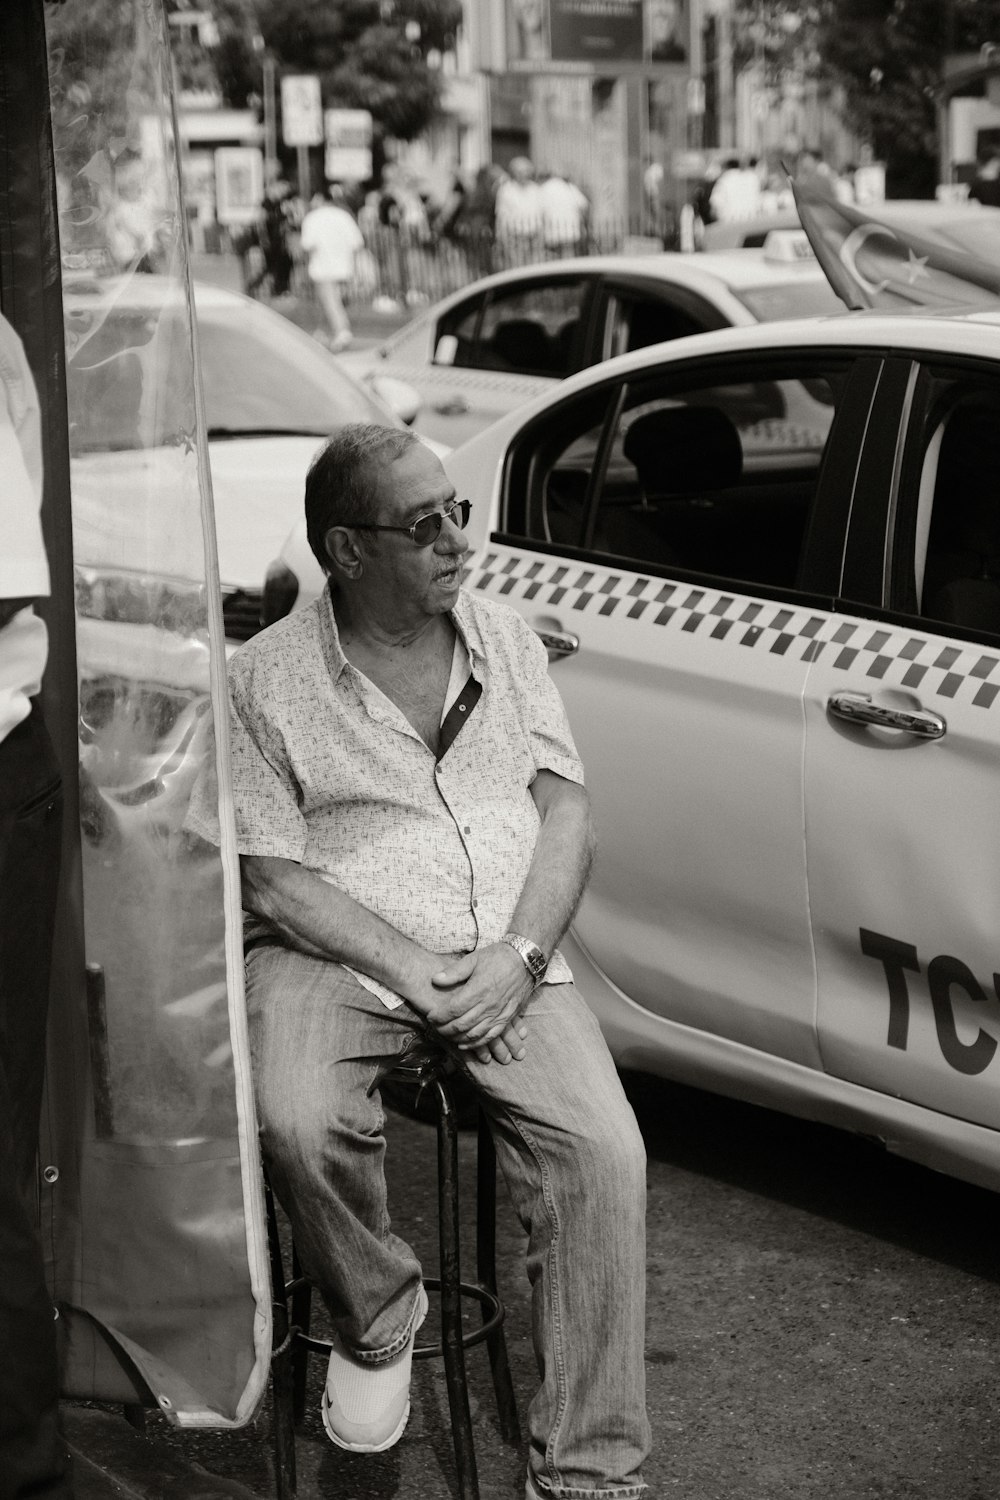 a man sitting on a stool in front of a taxi cab